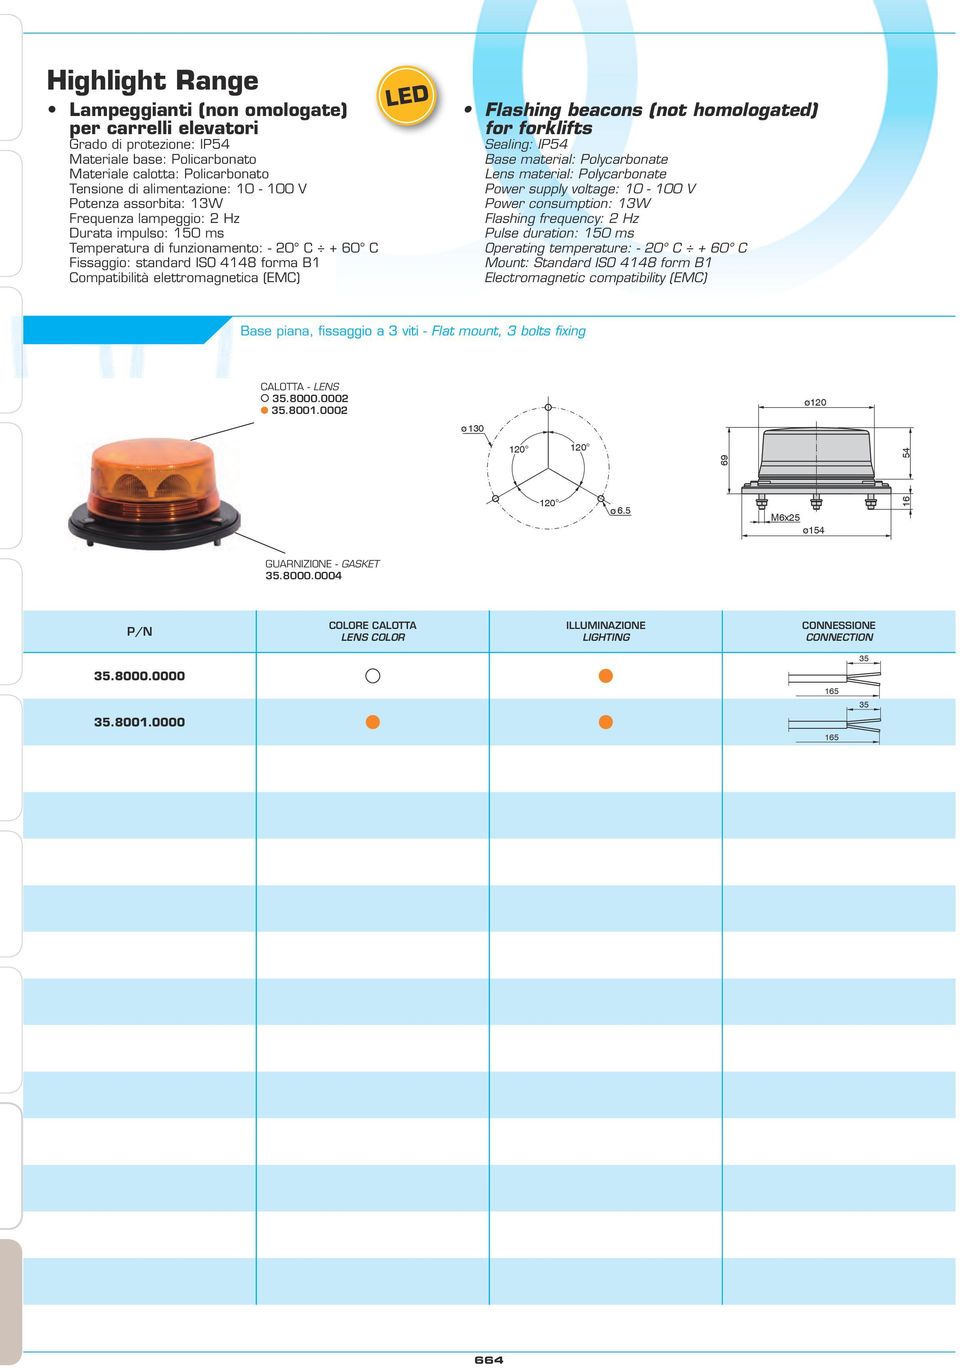 Flashing beacons (not homologated) for forklifts Sealing: IP54 Base material: Polycarbonate Lens material: Polycarbonate Power supply voltage: 10-100 V Power consumption: 13W Flashing frequency: 2 Hz